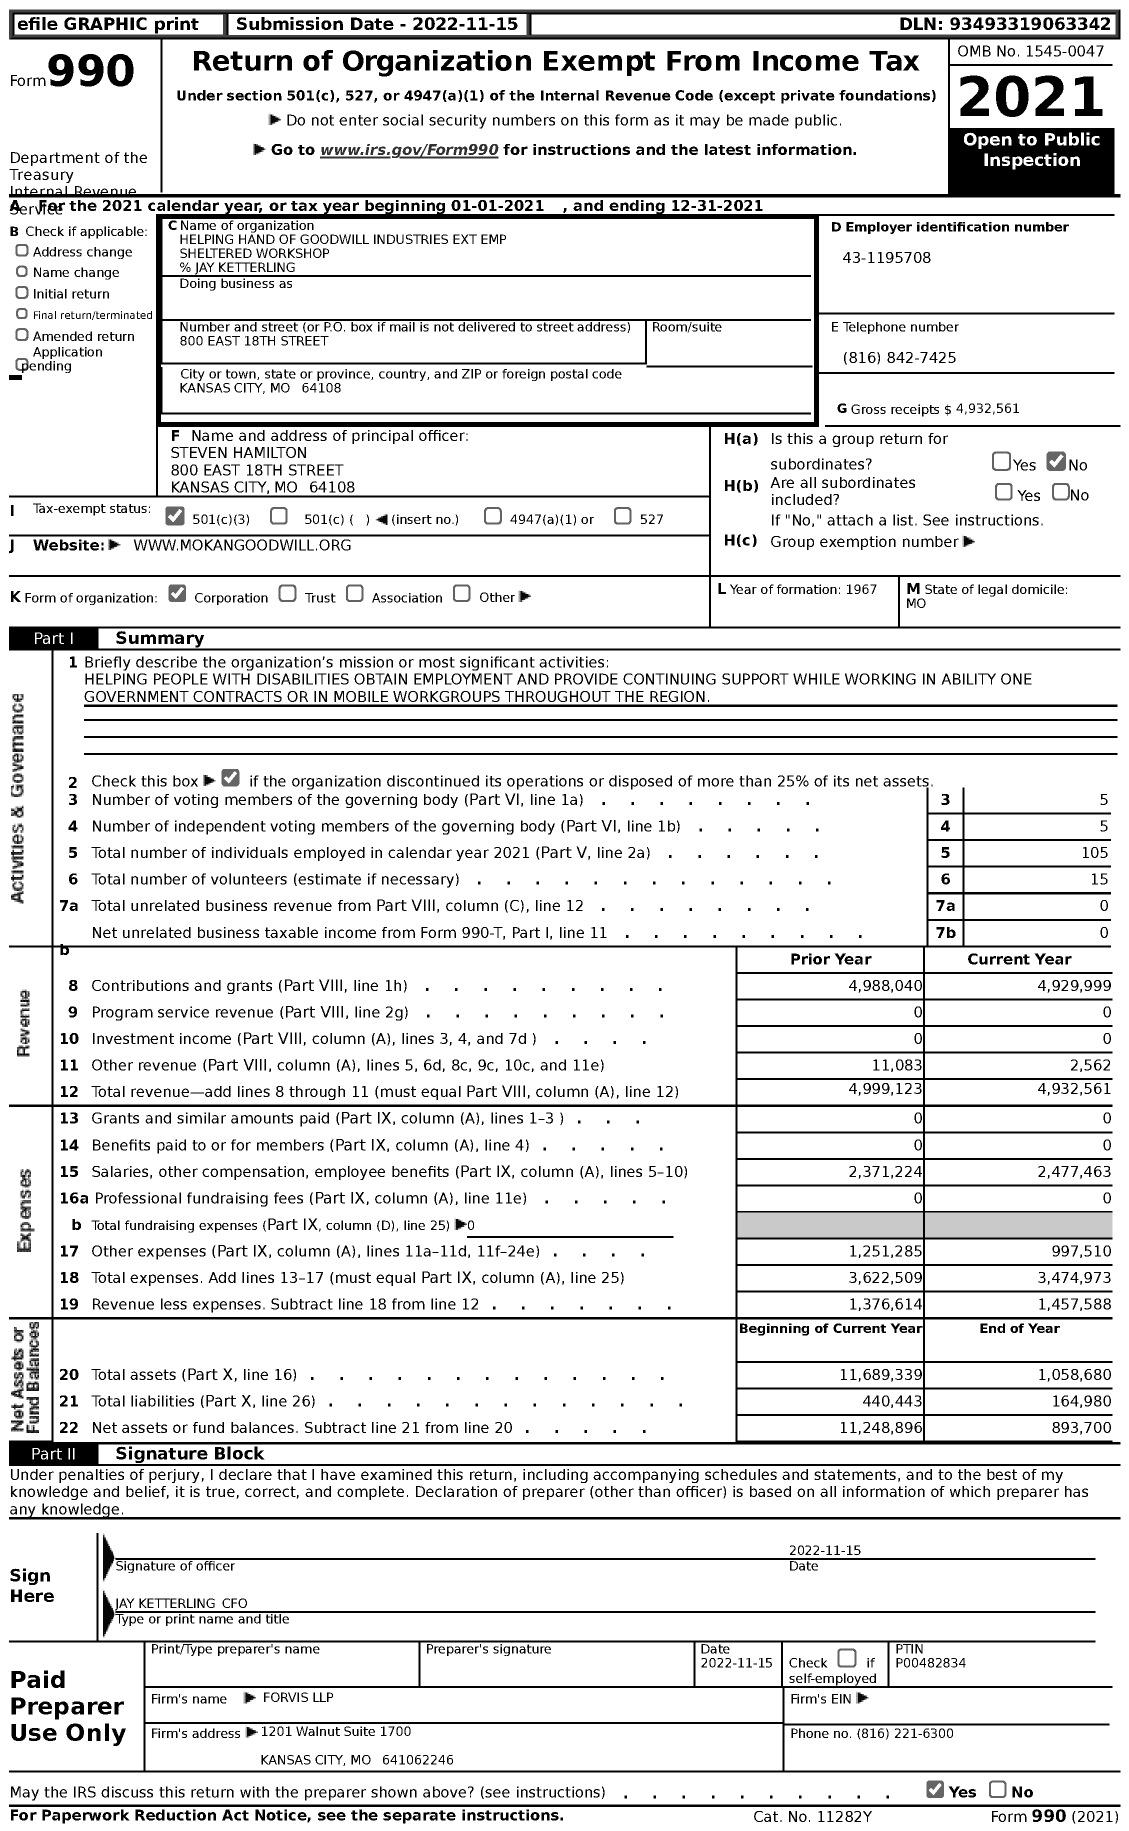 Image of first page of 2021 Form 990 for Helping Hand of Goodwill Industries Ext Emp Sheltered Workshop